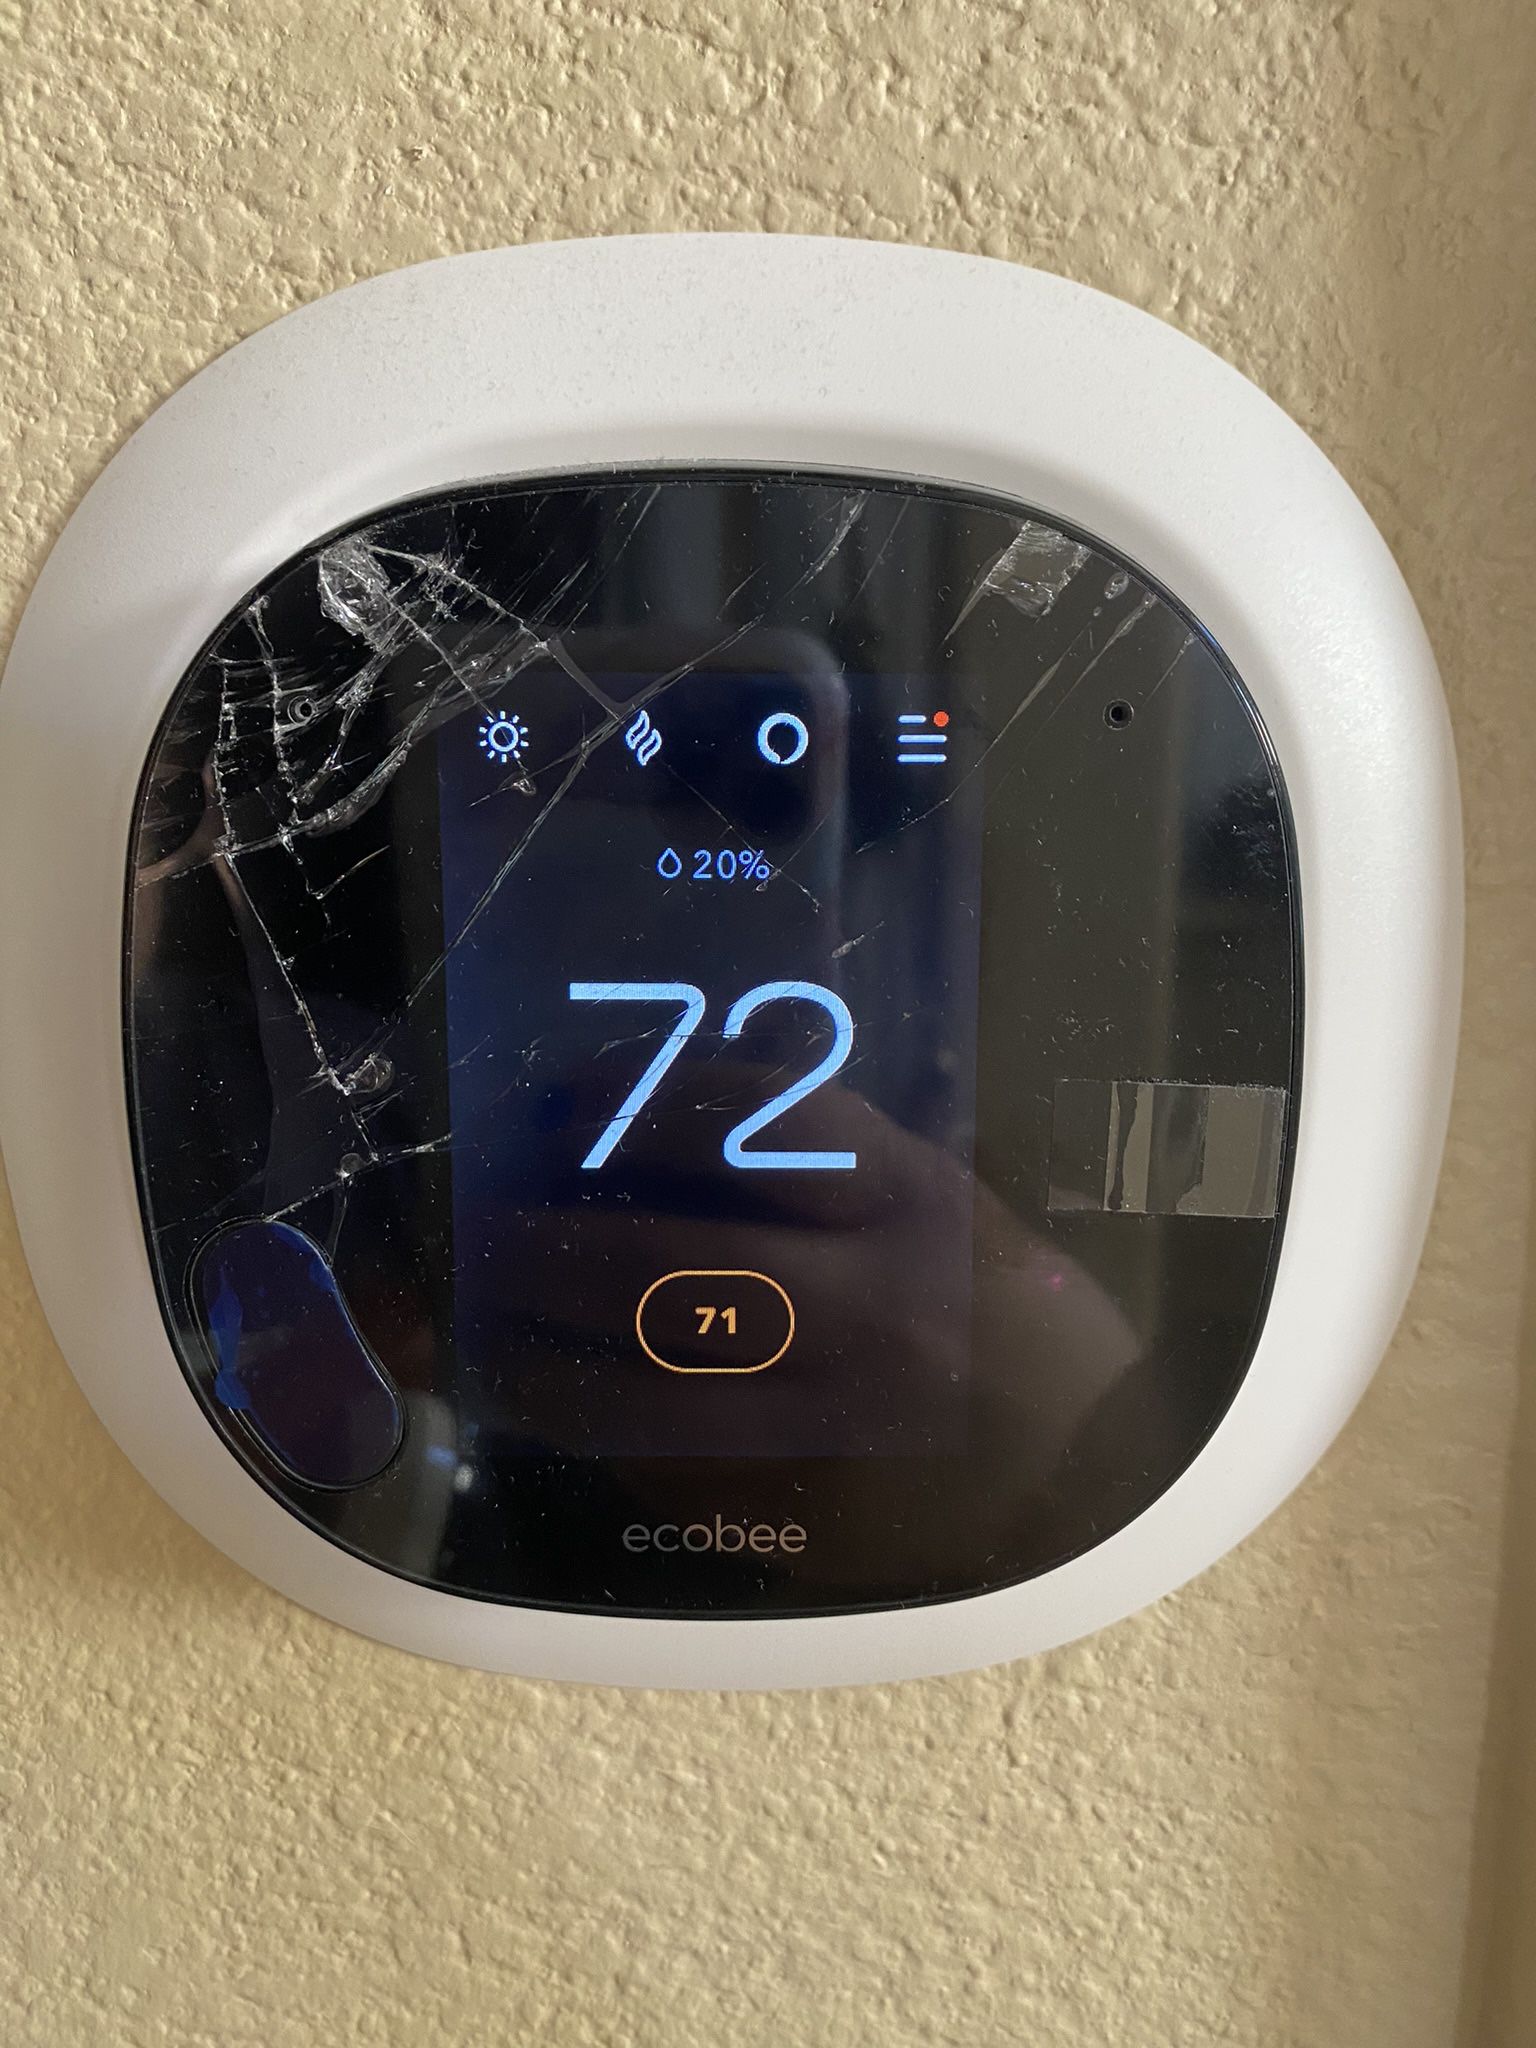 Fully Operable (Cracked Screen) Ecobee Smart Thermostat